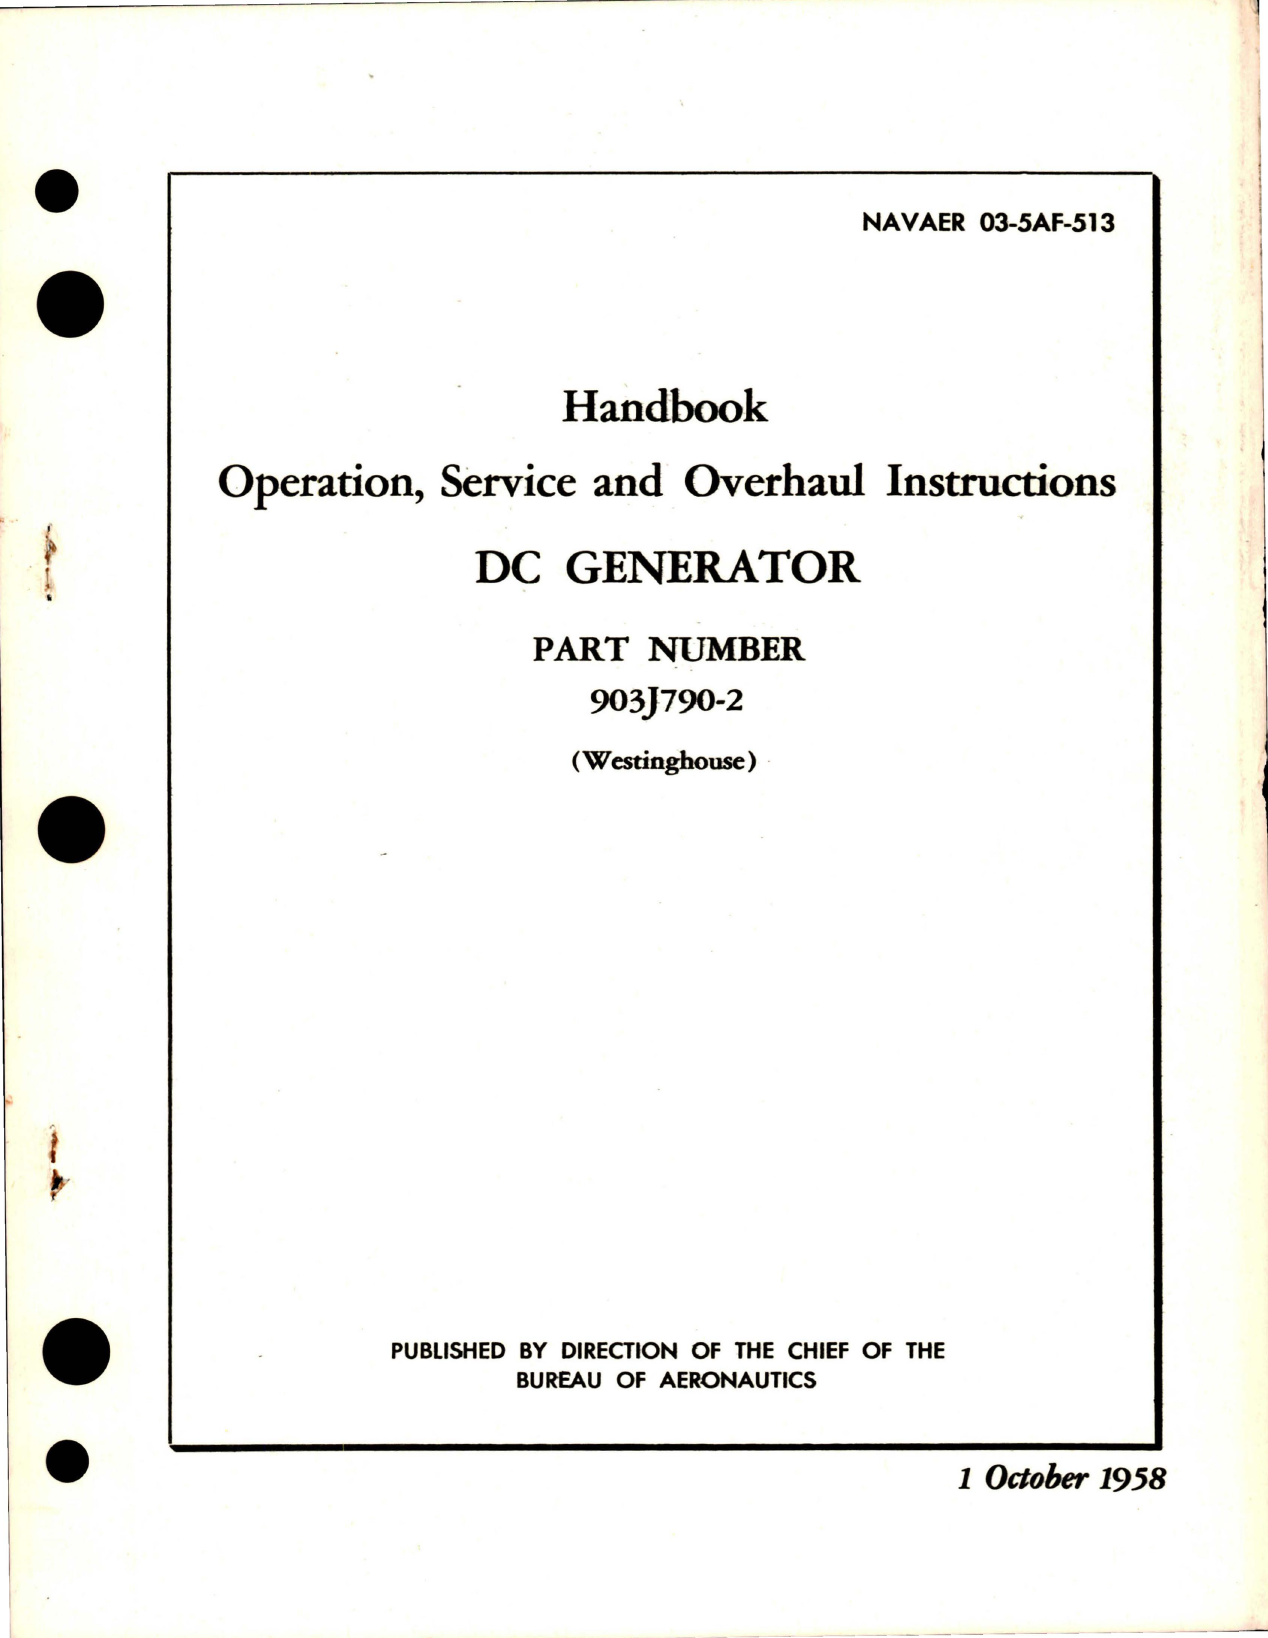 Sample page 1 from AirCorps Library document: Operation, Service and Overhaul Instructions for DC Generator - Part 903J790-2